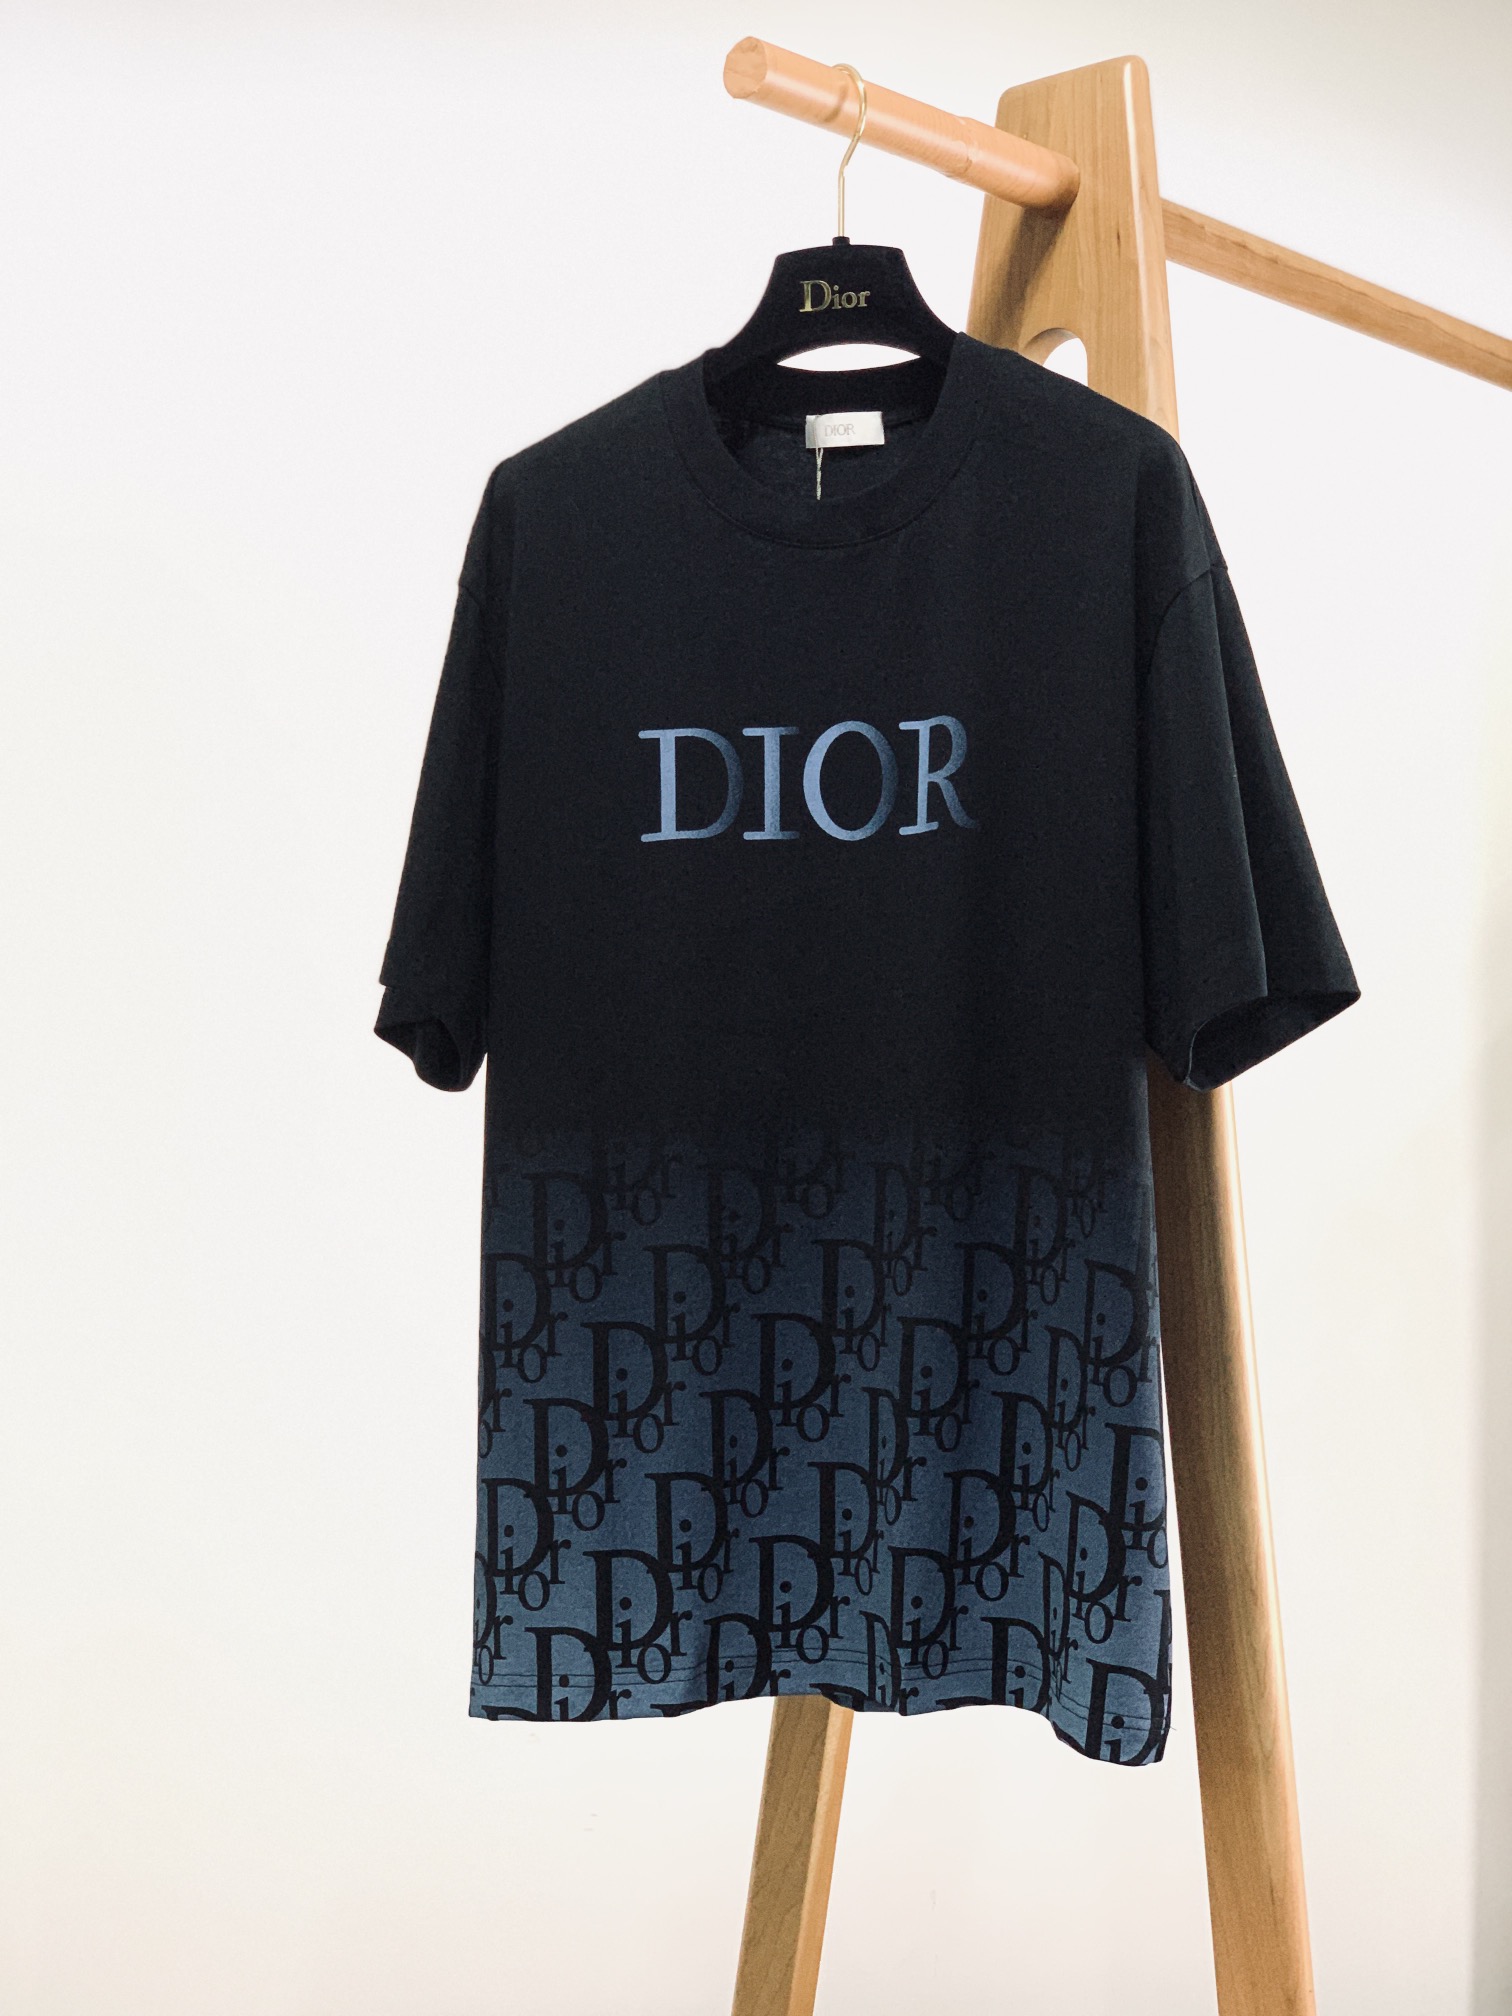 Dior Clothing T-Shirt New Designer Replica
 Printing Unisex Cotton Spring/Summer Collection Oblique